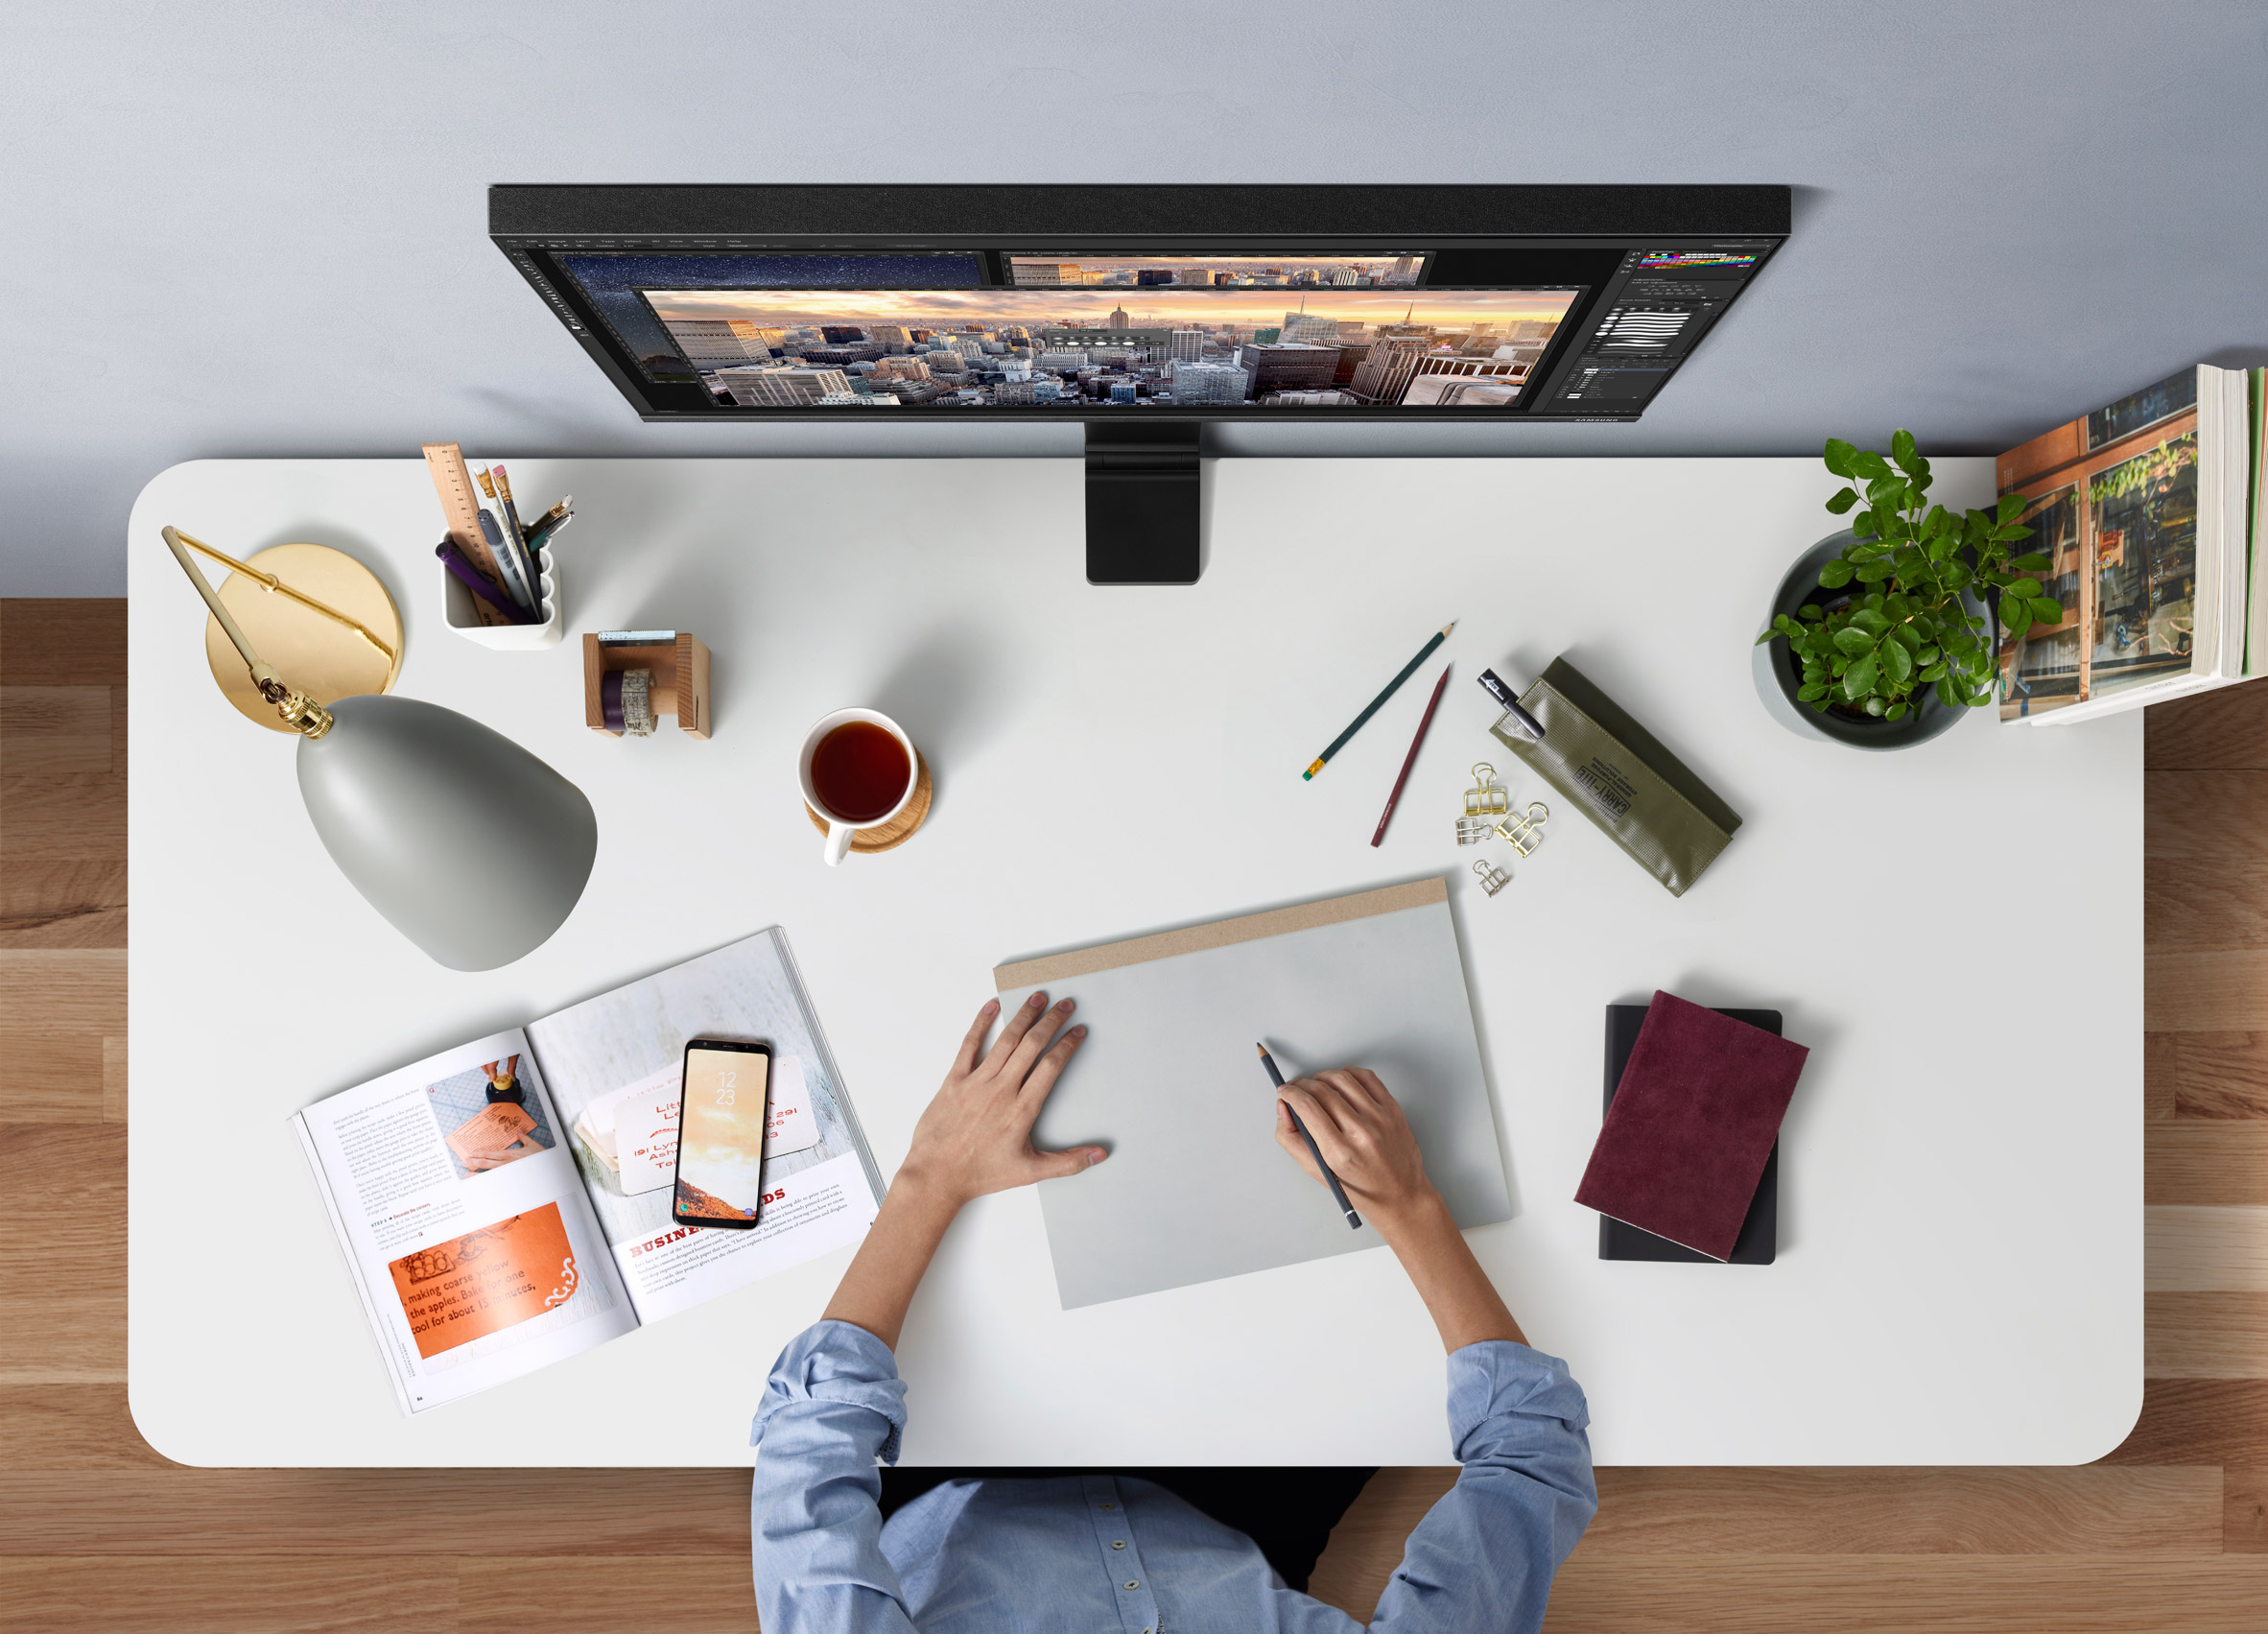 Samsung's minimalist Space Monitor can free up your desk